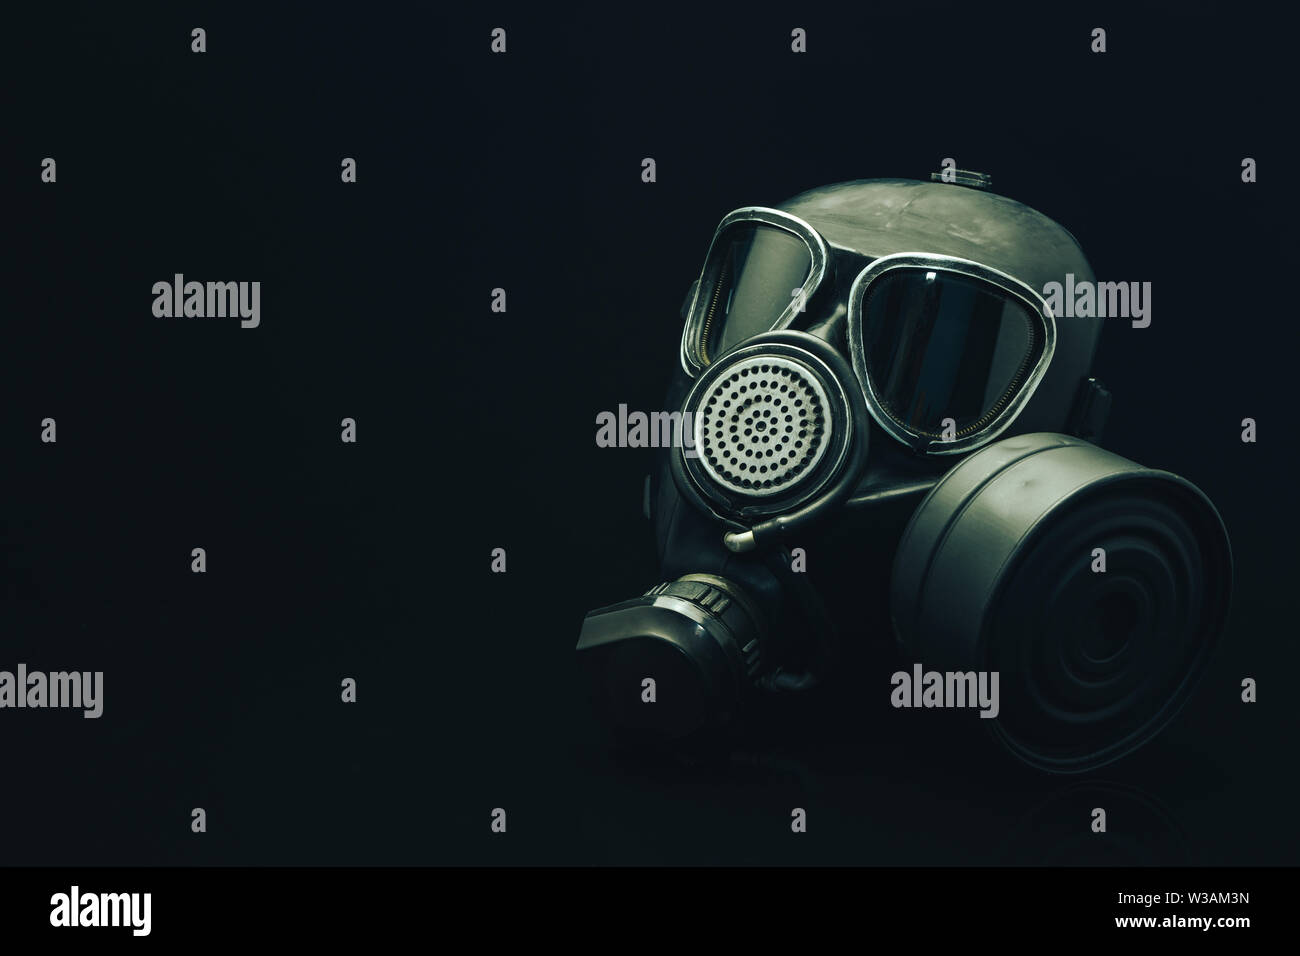 Gas mask on a black table and dark background Stock Photo - Alamy